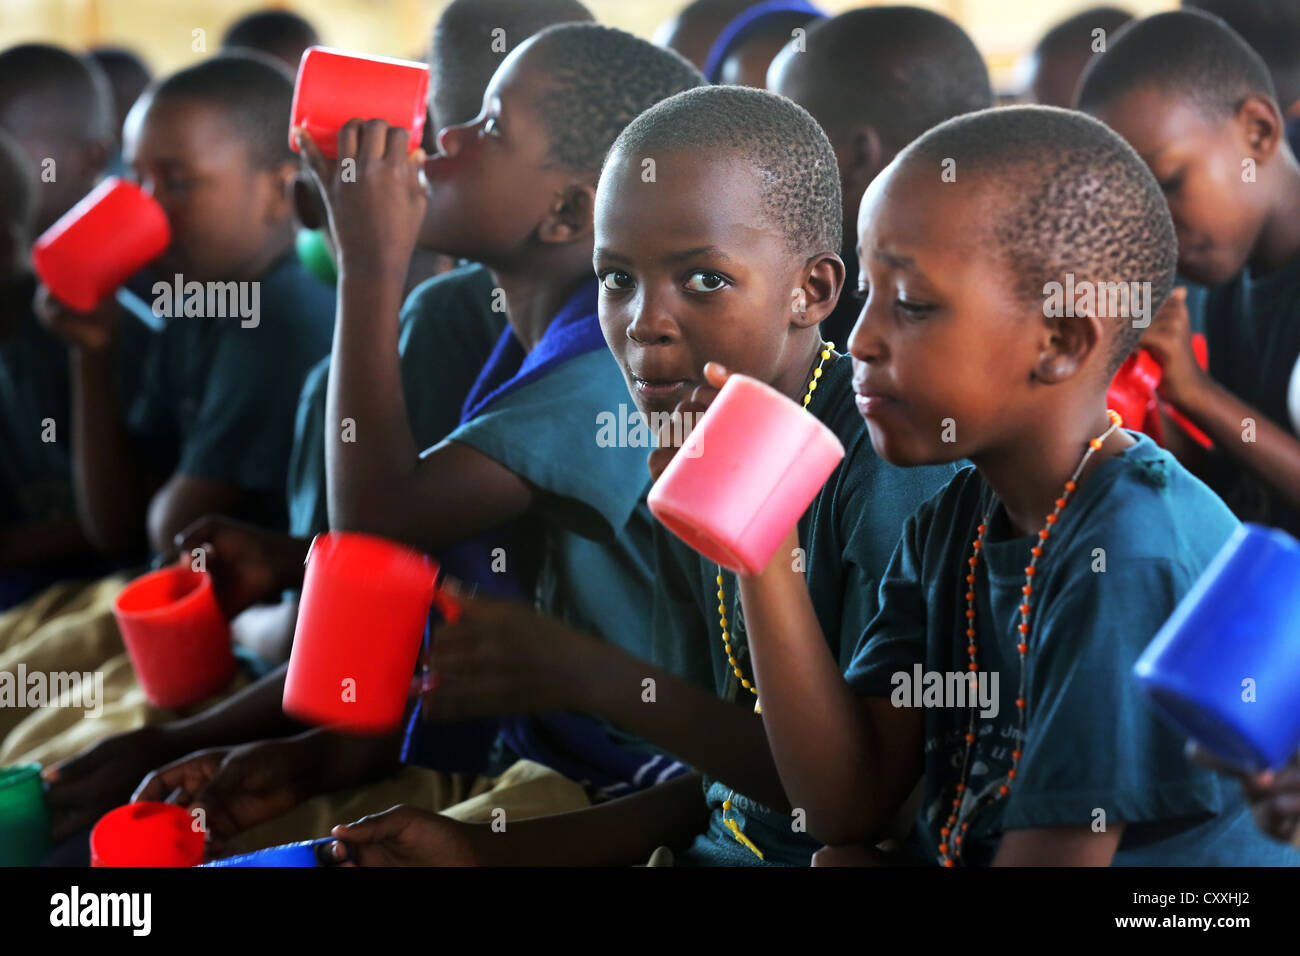 Porridge school lunch for pupils at a primary school in Tanzania Stock Photo